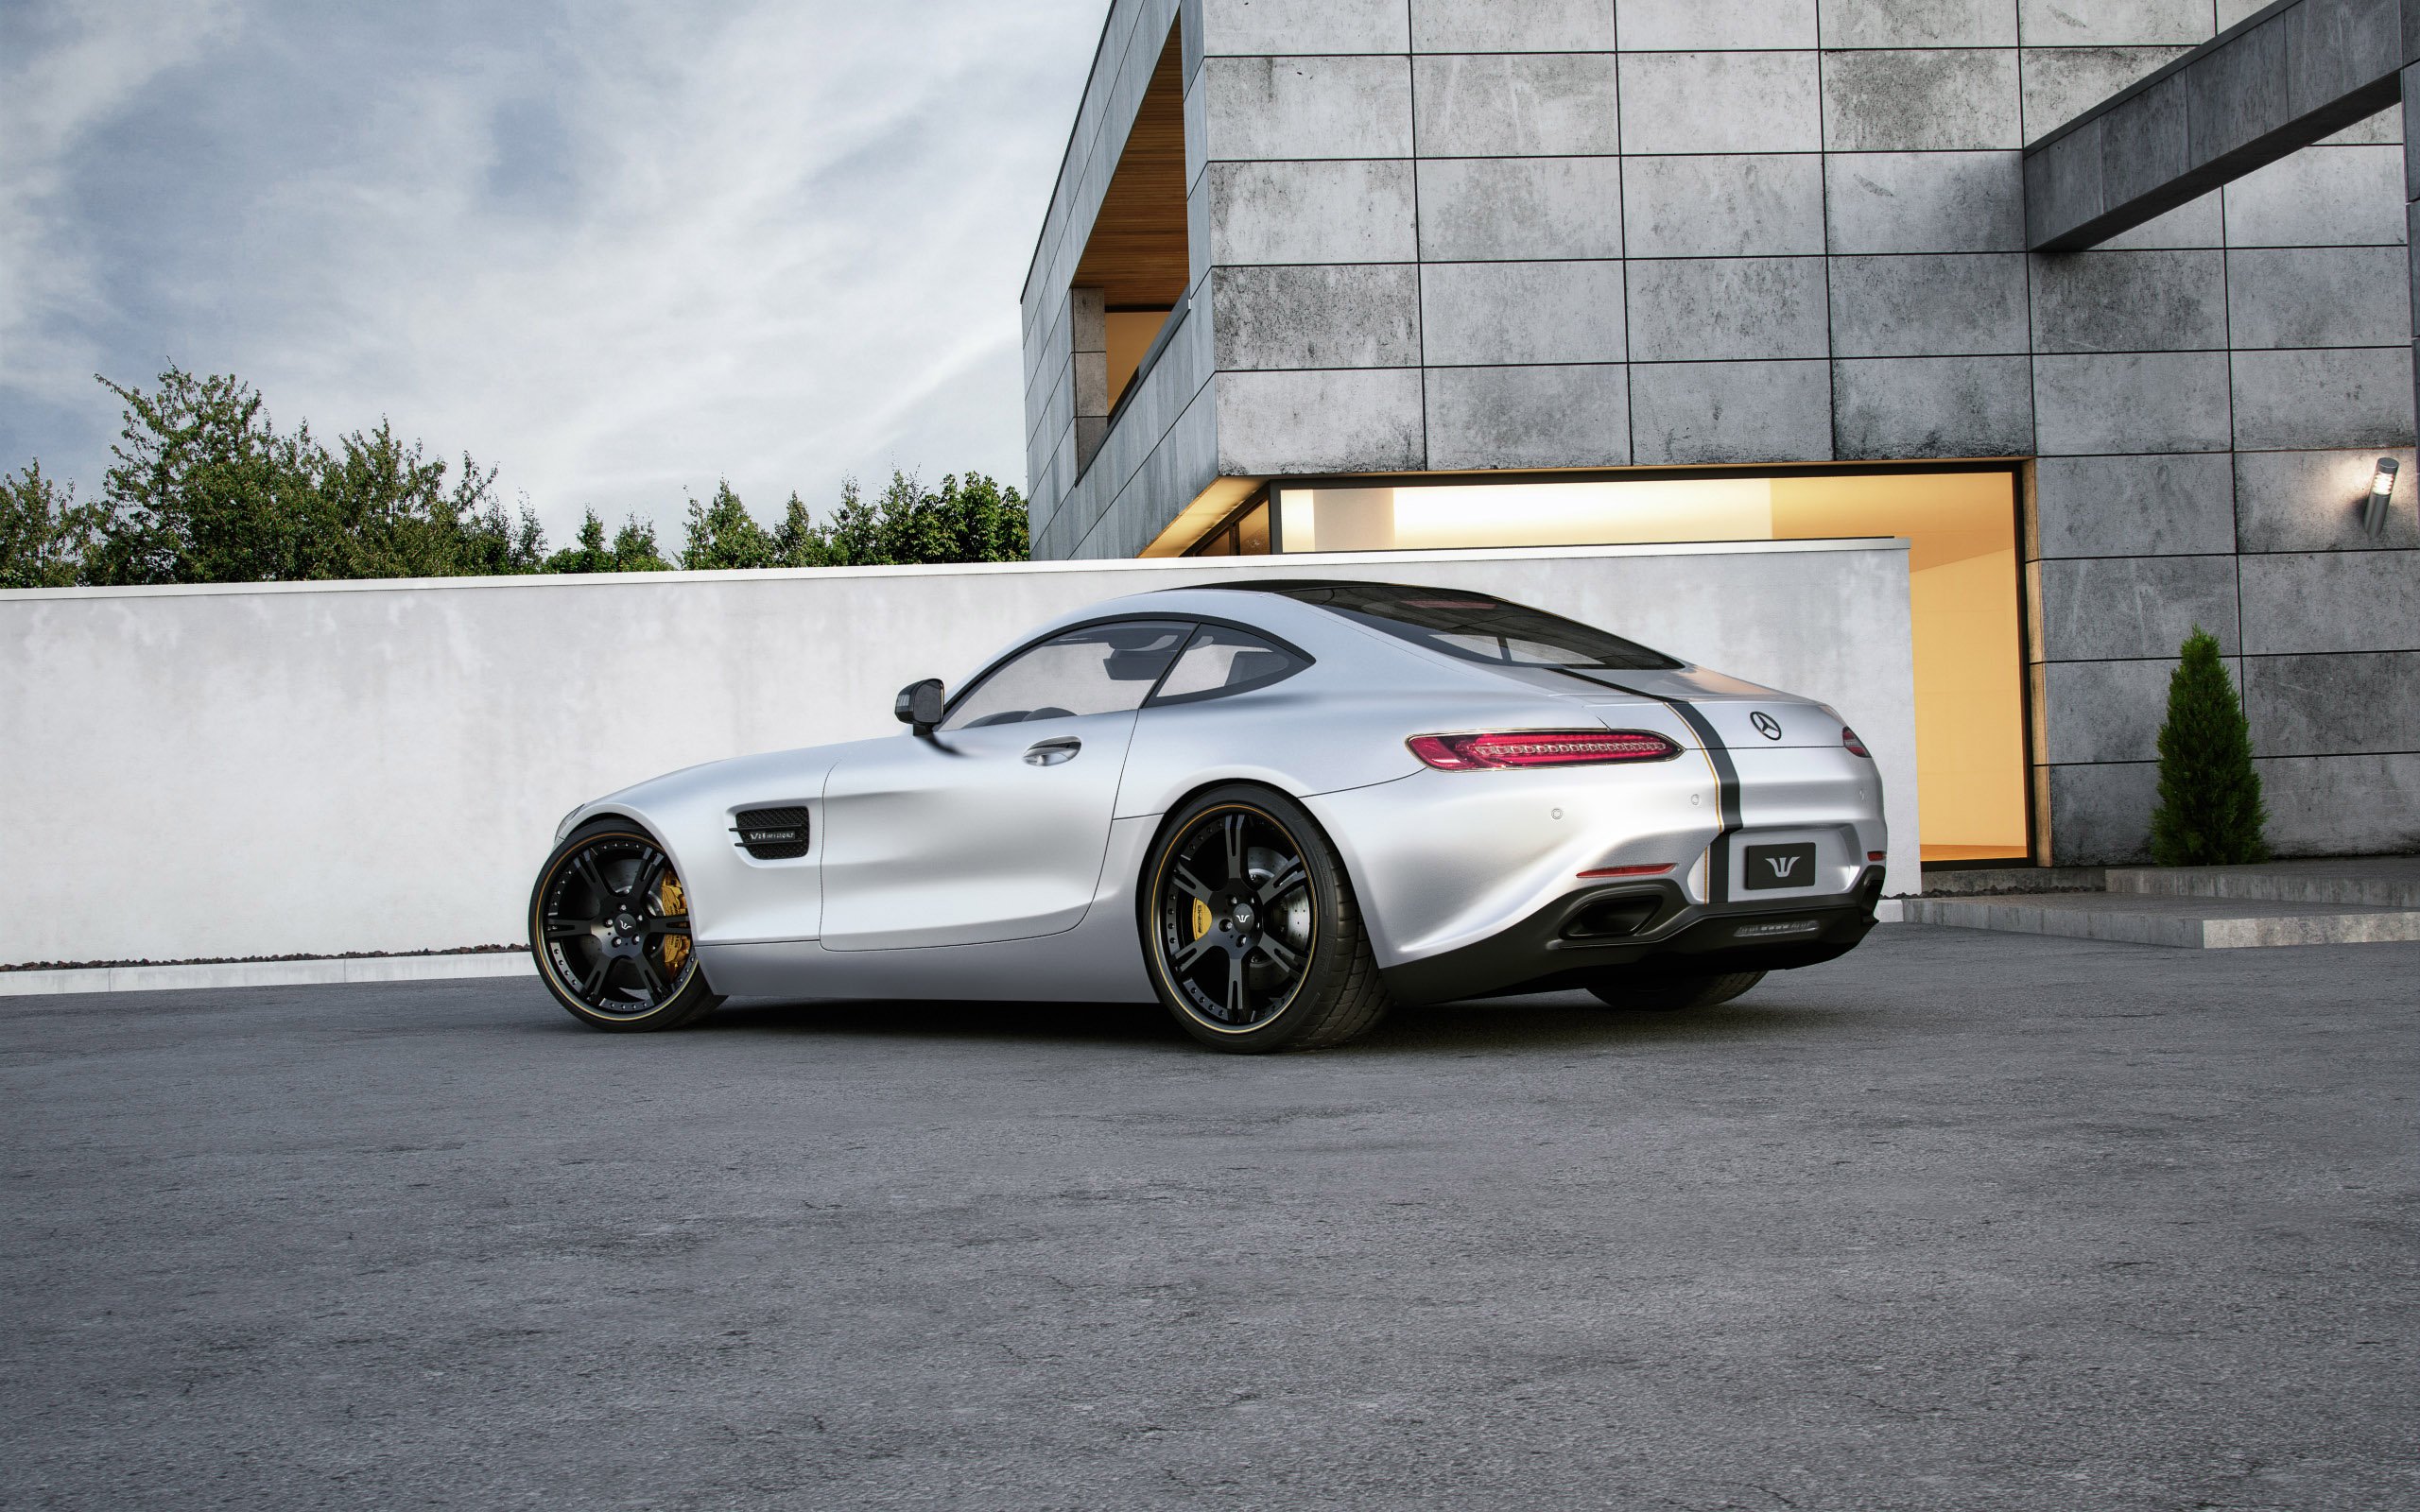 wheelsandmore, Mercedes, Amg, Gt, S, Coupe, Tuning, 2015, Cars Wallpaper